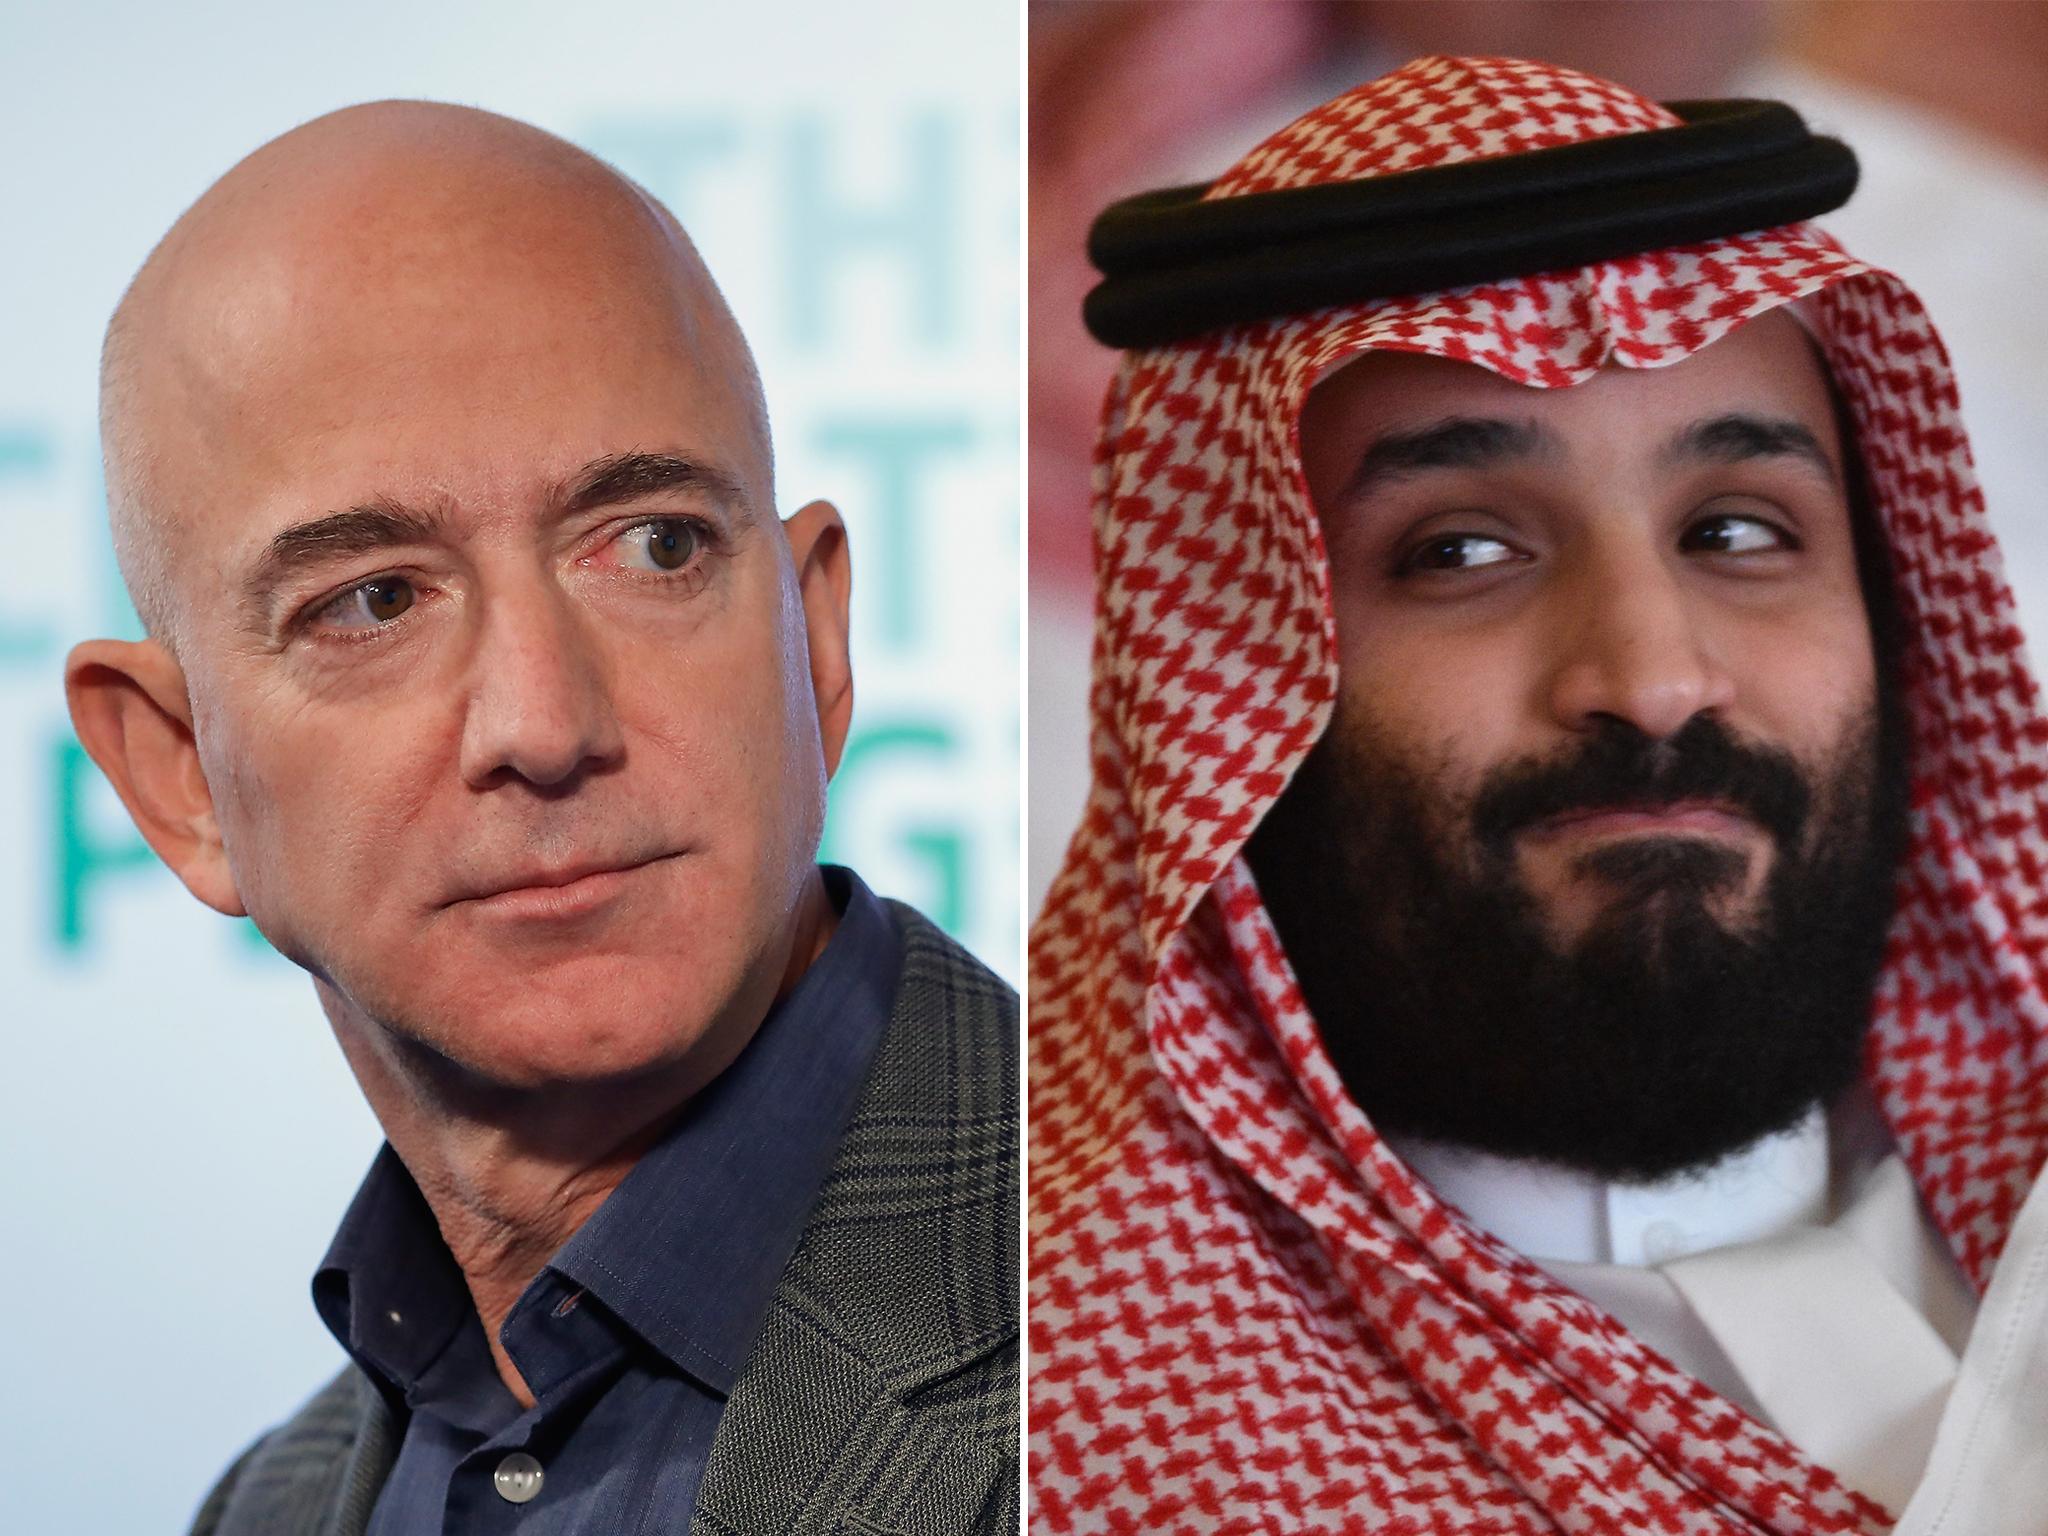 Mr Bezos and Prince Mohammed struck up a connection in the months before the killing of journalist Jamal Khashoggi